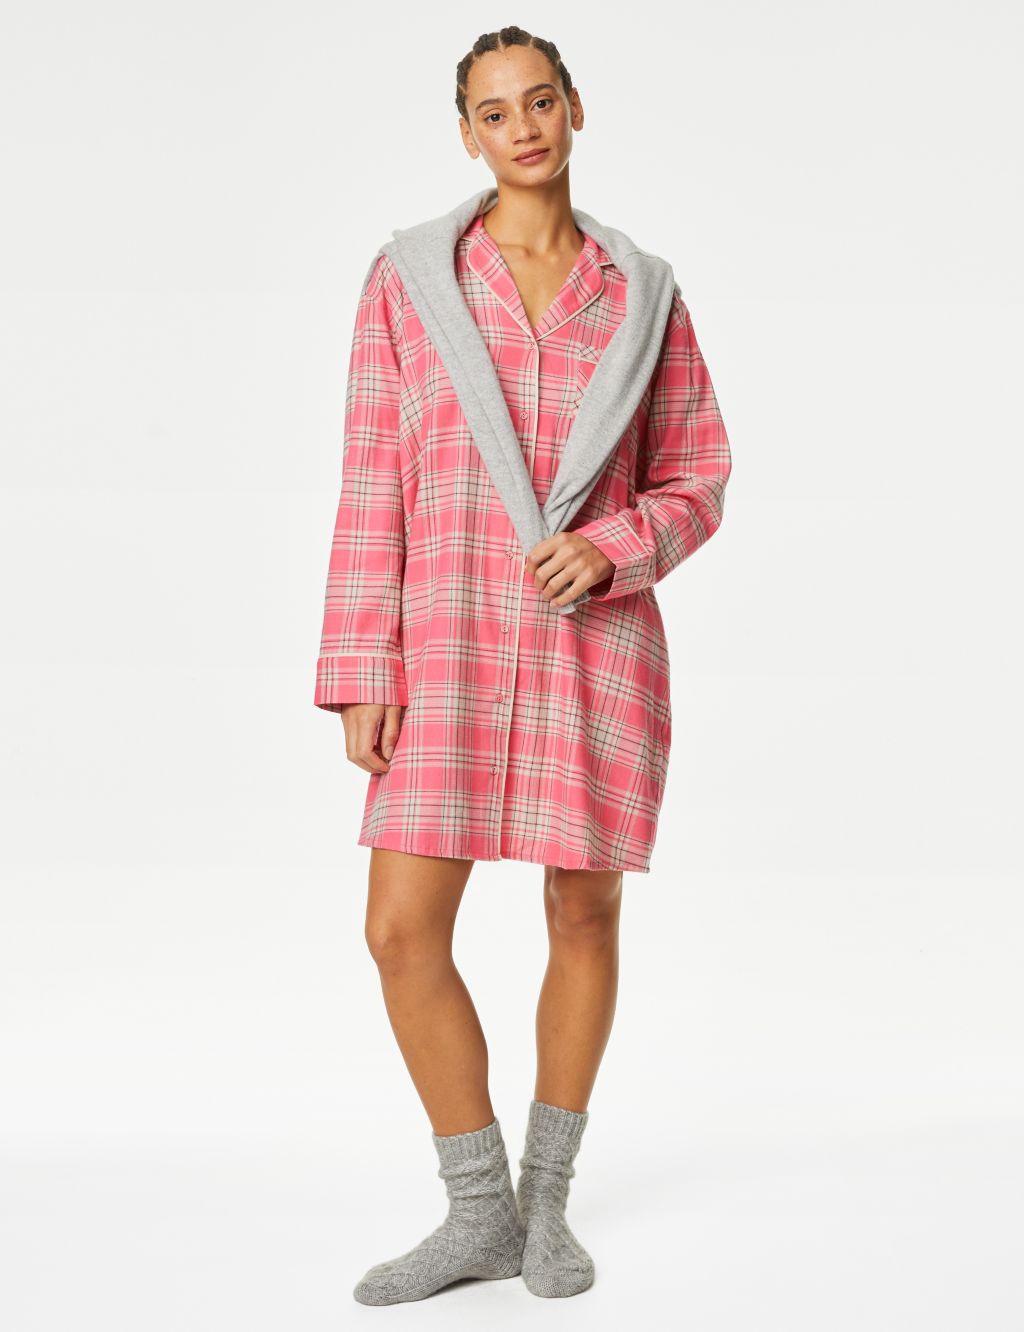 Cotton Blend Checked Nightshirt image 1